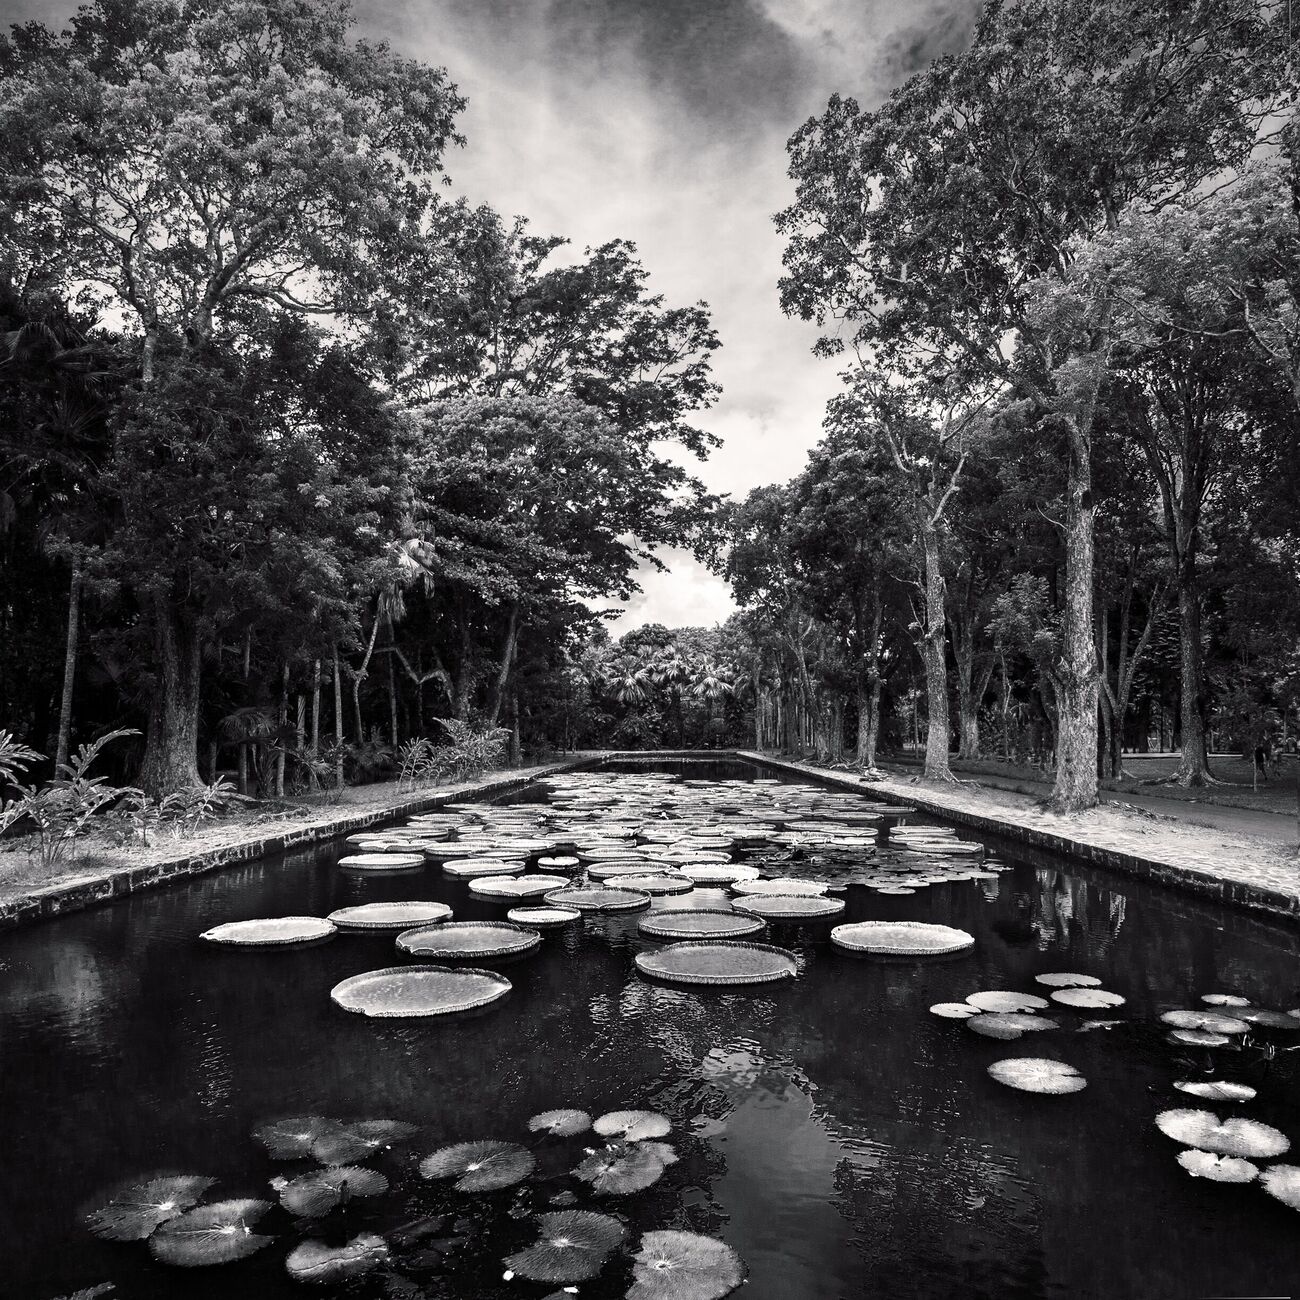 Giant Water Lilies, Pamplemousses Botanical Garden, Maurice. Mars 2014. Ref-11439 - Denis Olivier Photographie